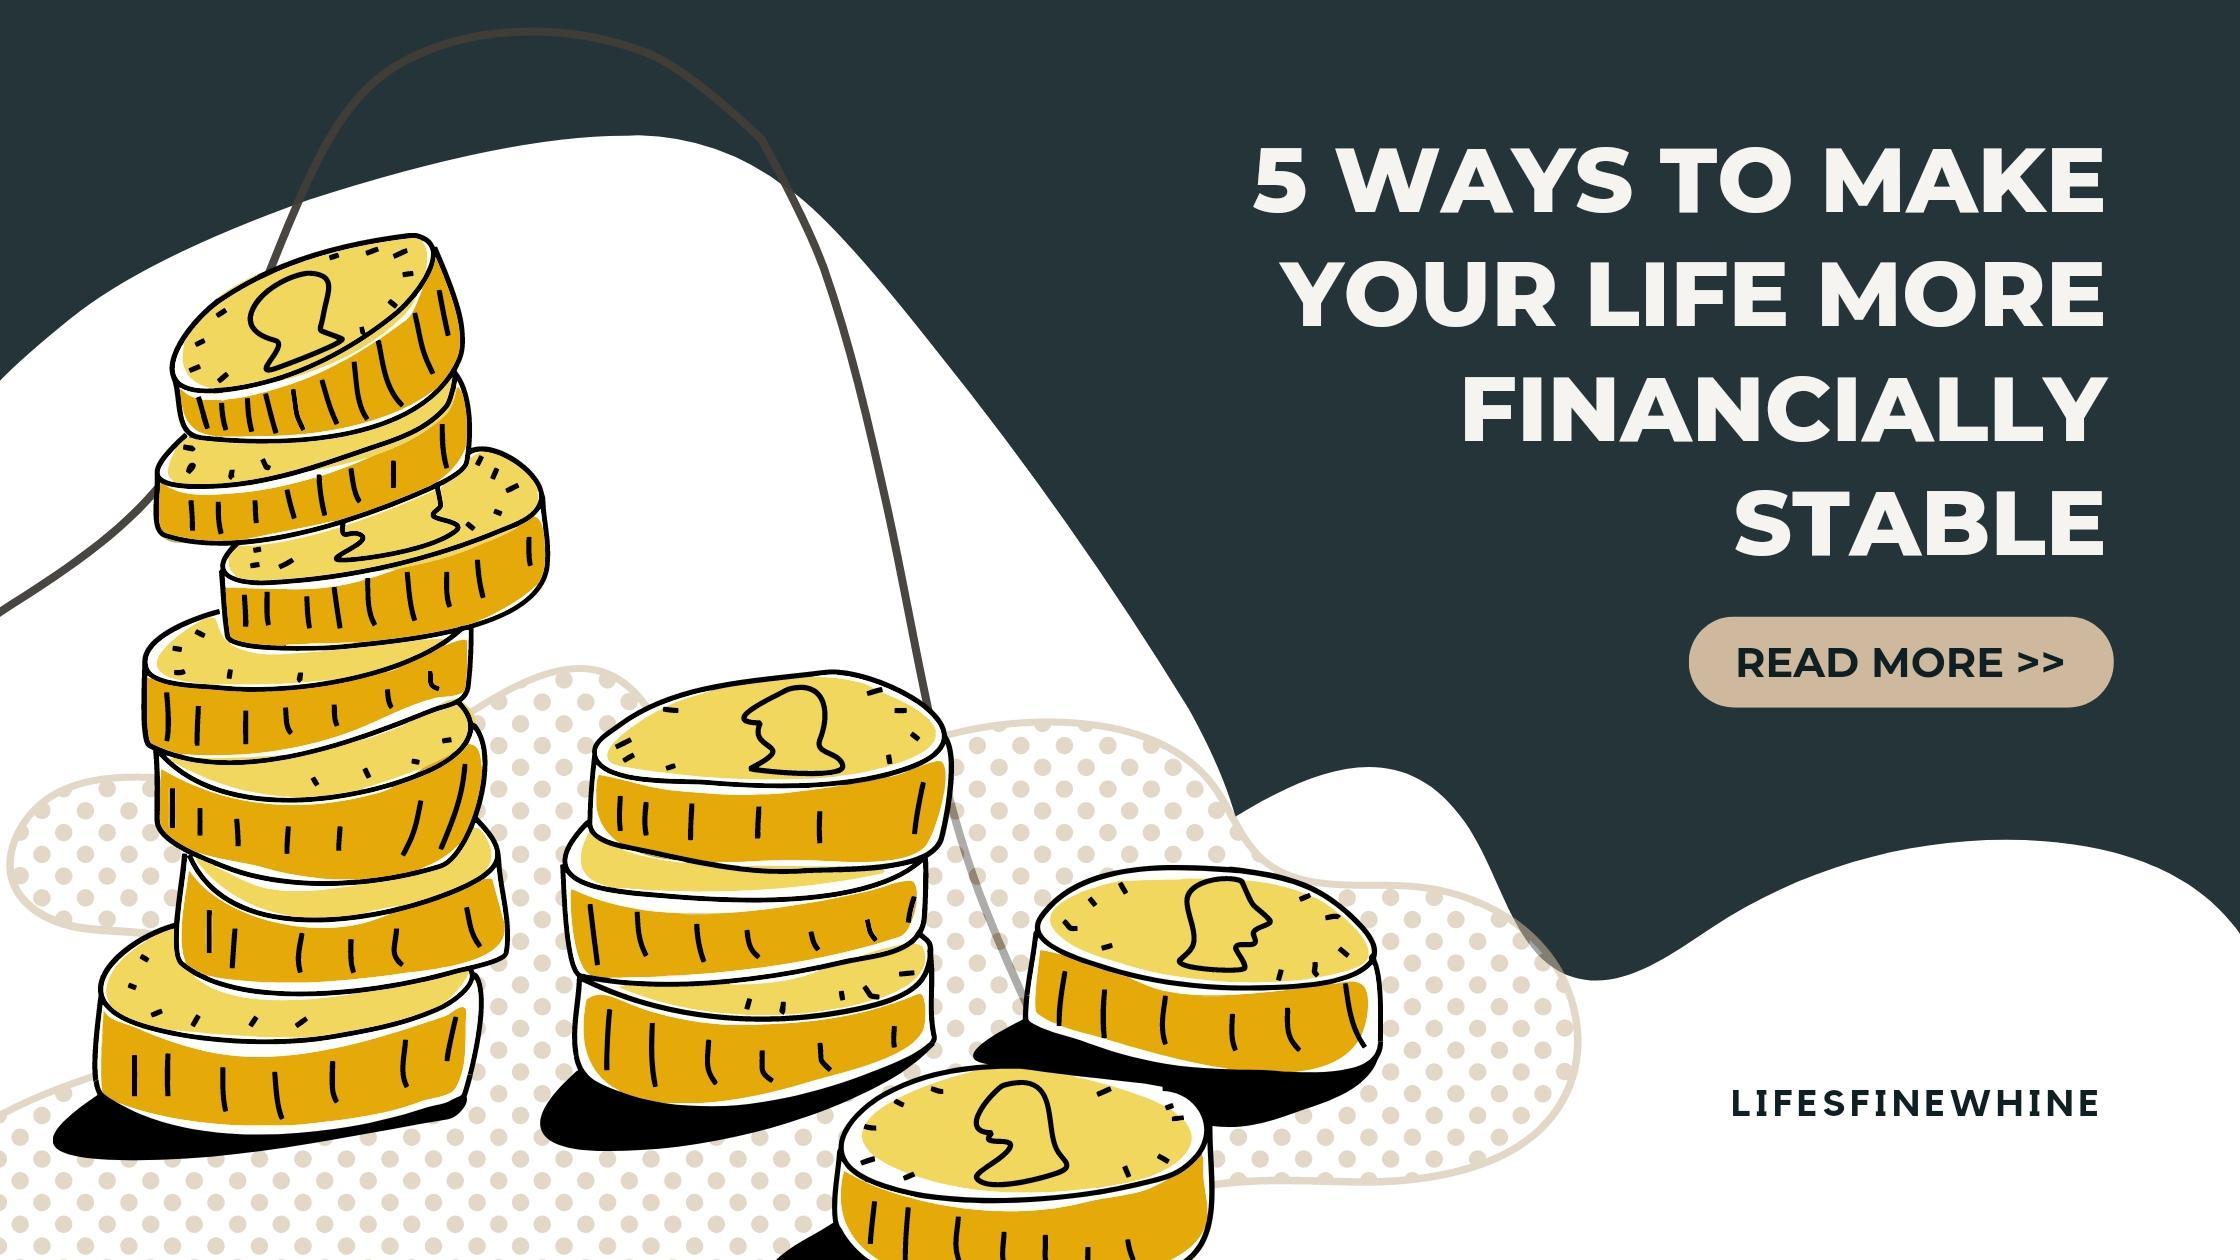 5 Ways To Make Your Life More Financially Stable